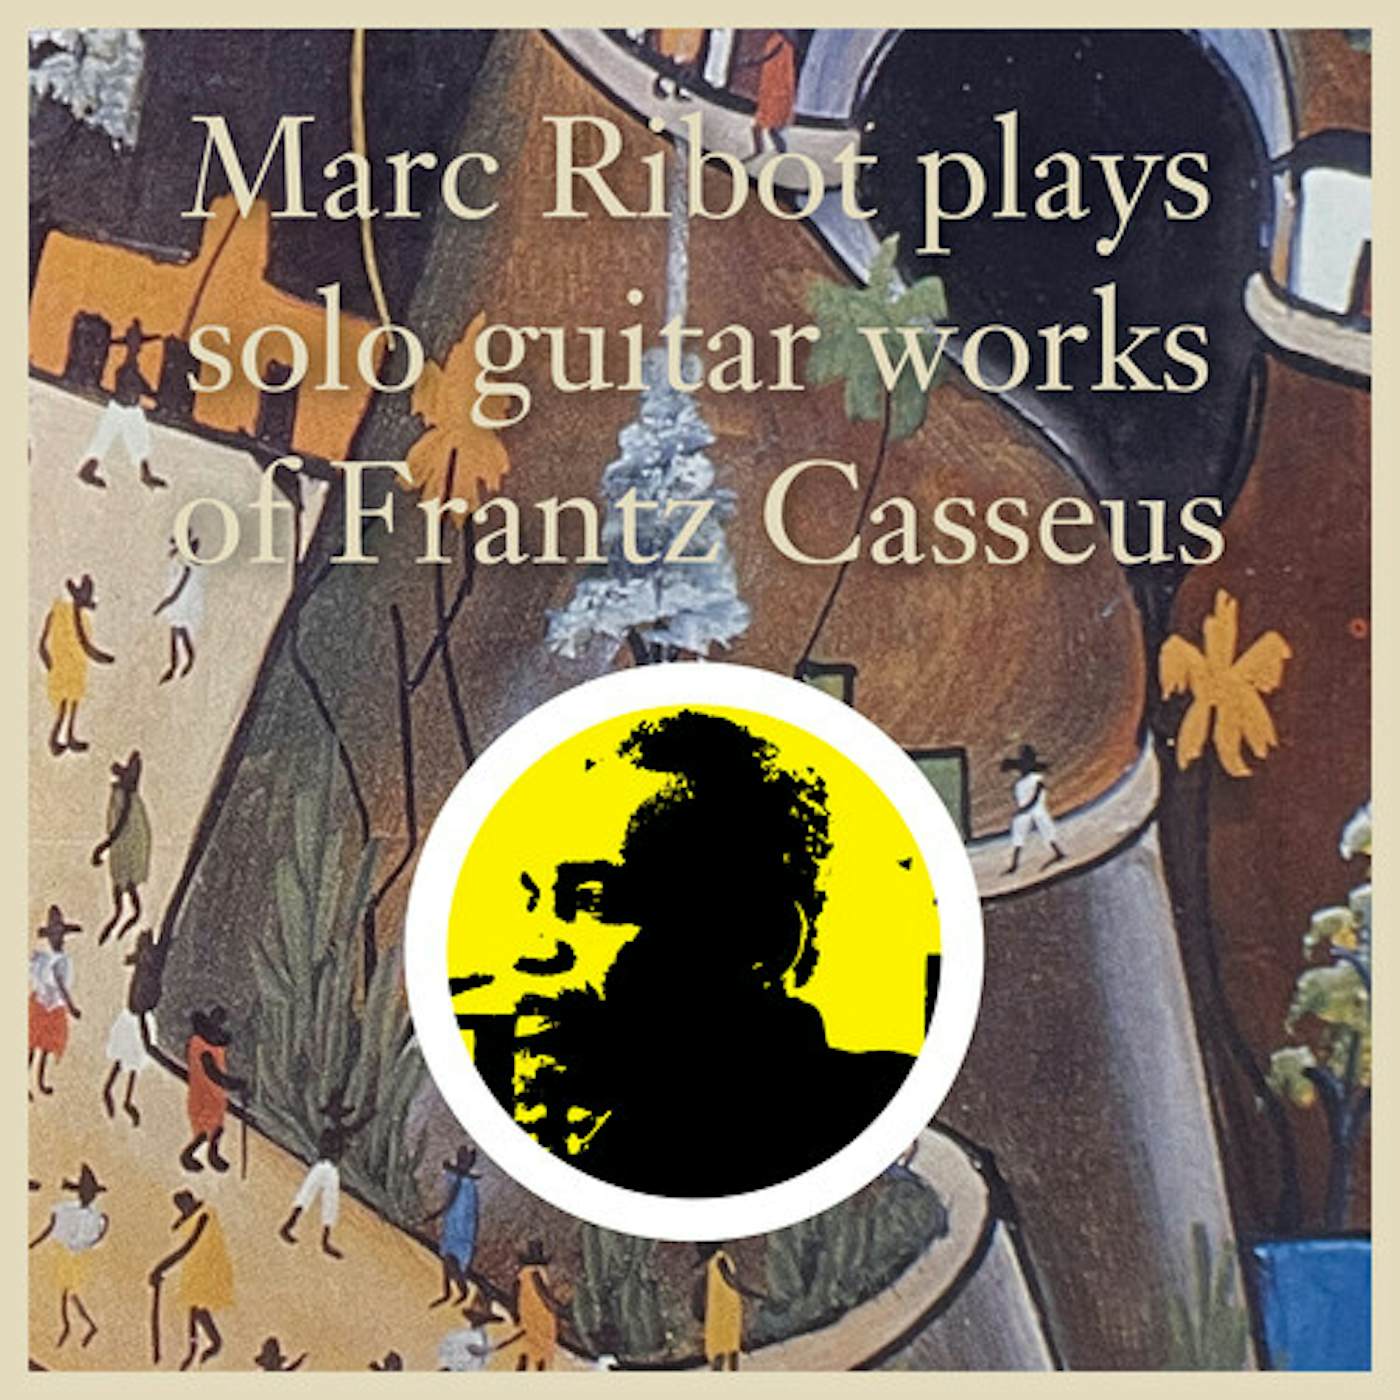 MARC RIBOT PLAYS SOLO GUITAR WORKS OF FRANTZ CD